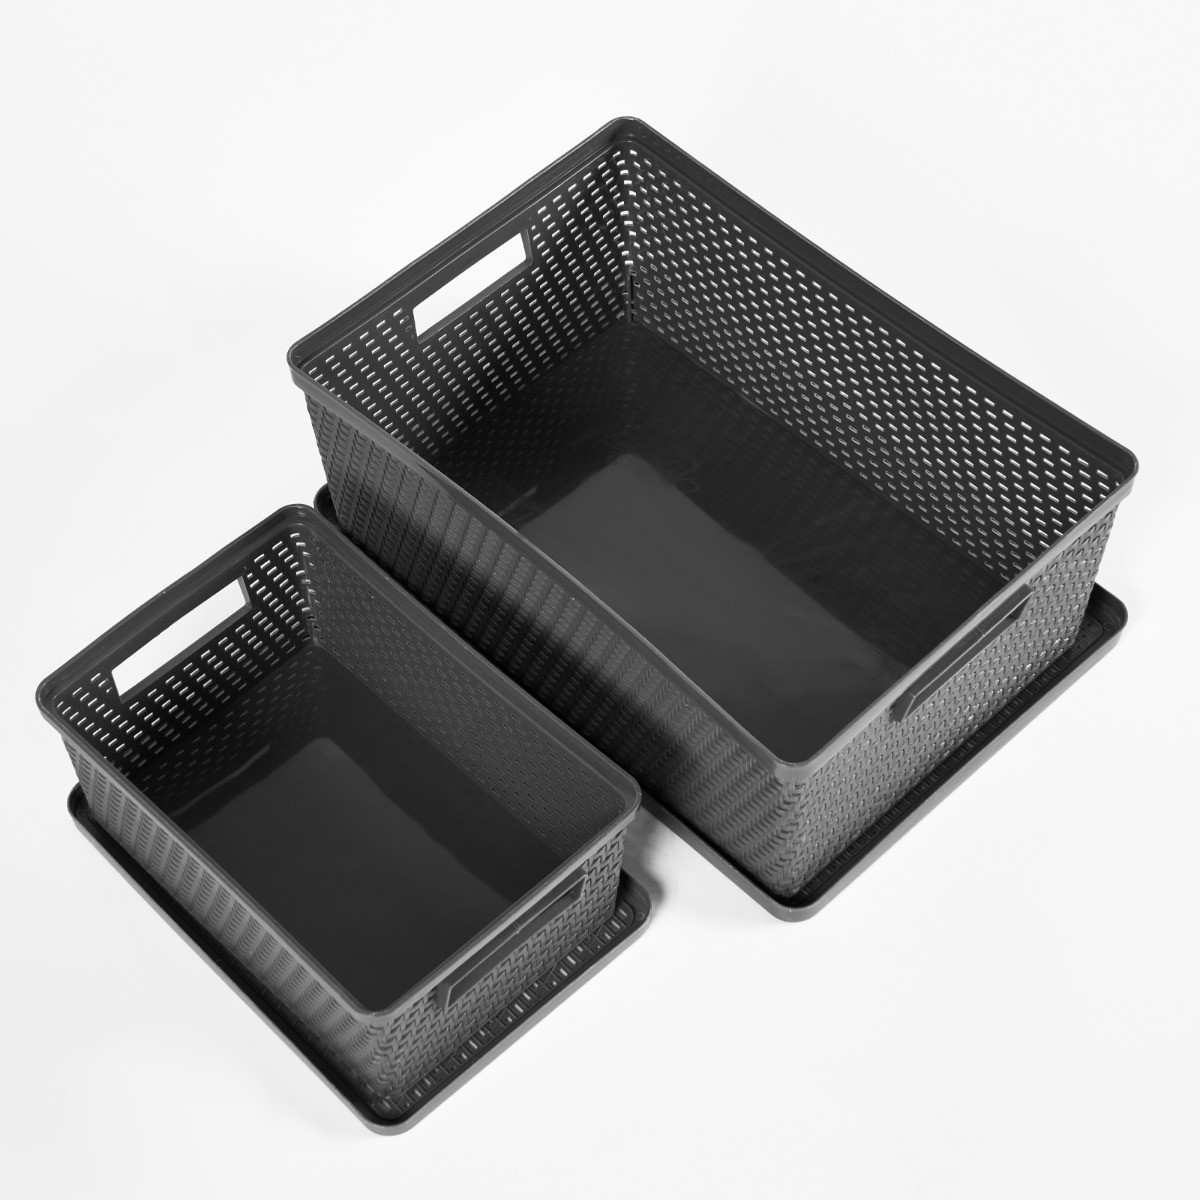 OHS Plastic Storage Boxes With Lid, Charcoal - 2 Pack>